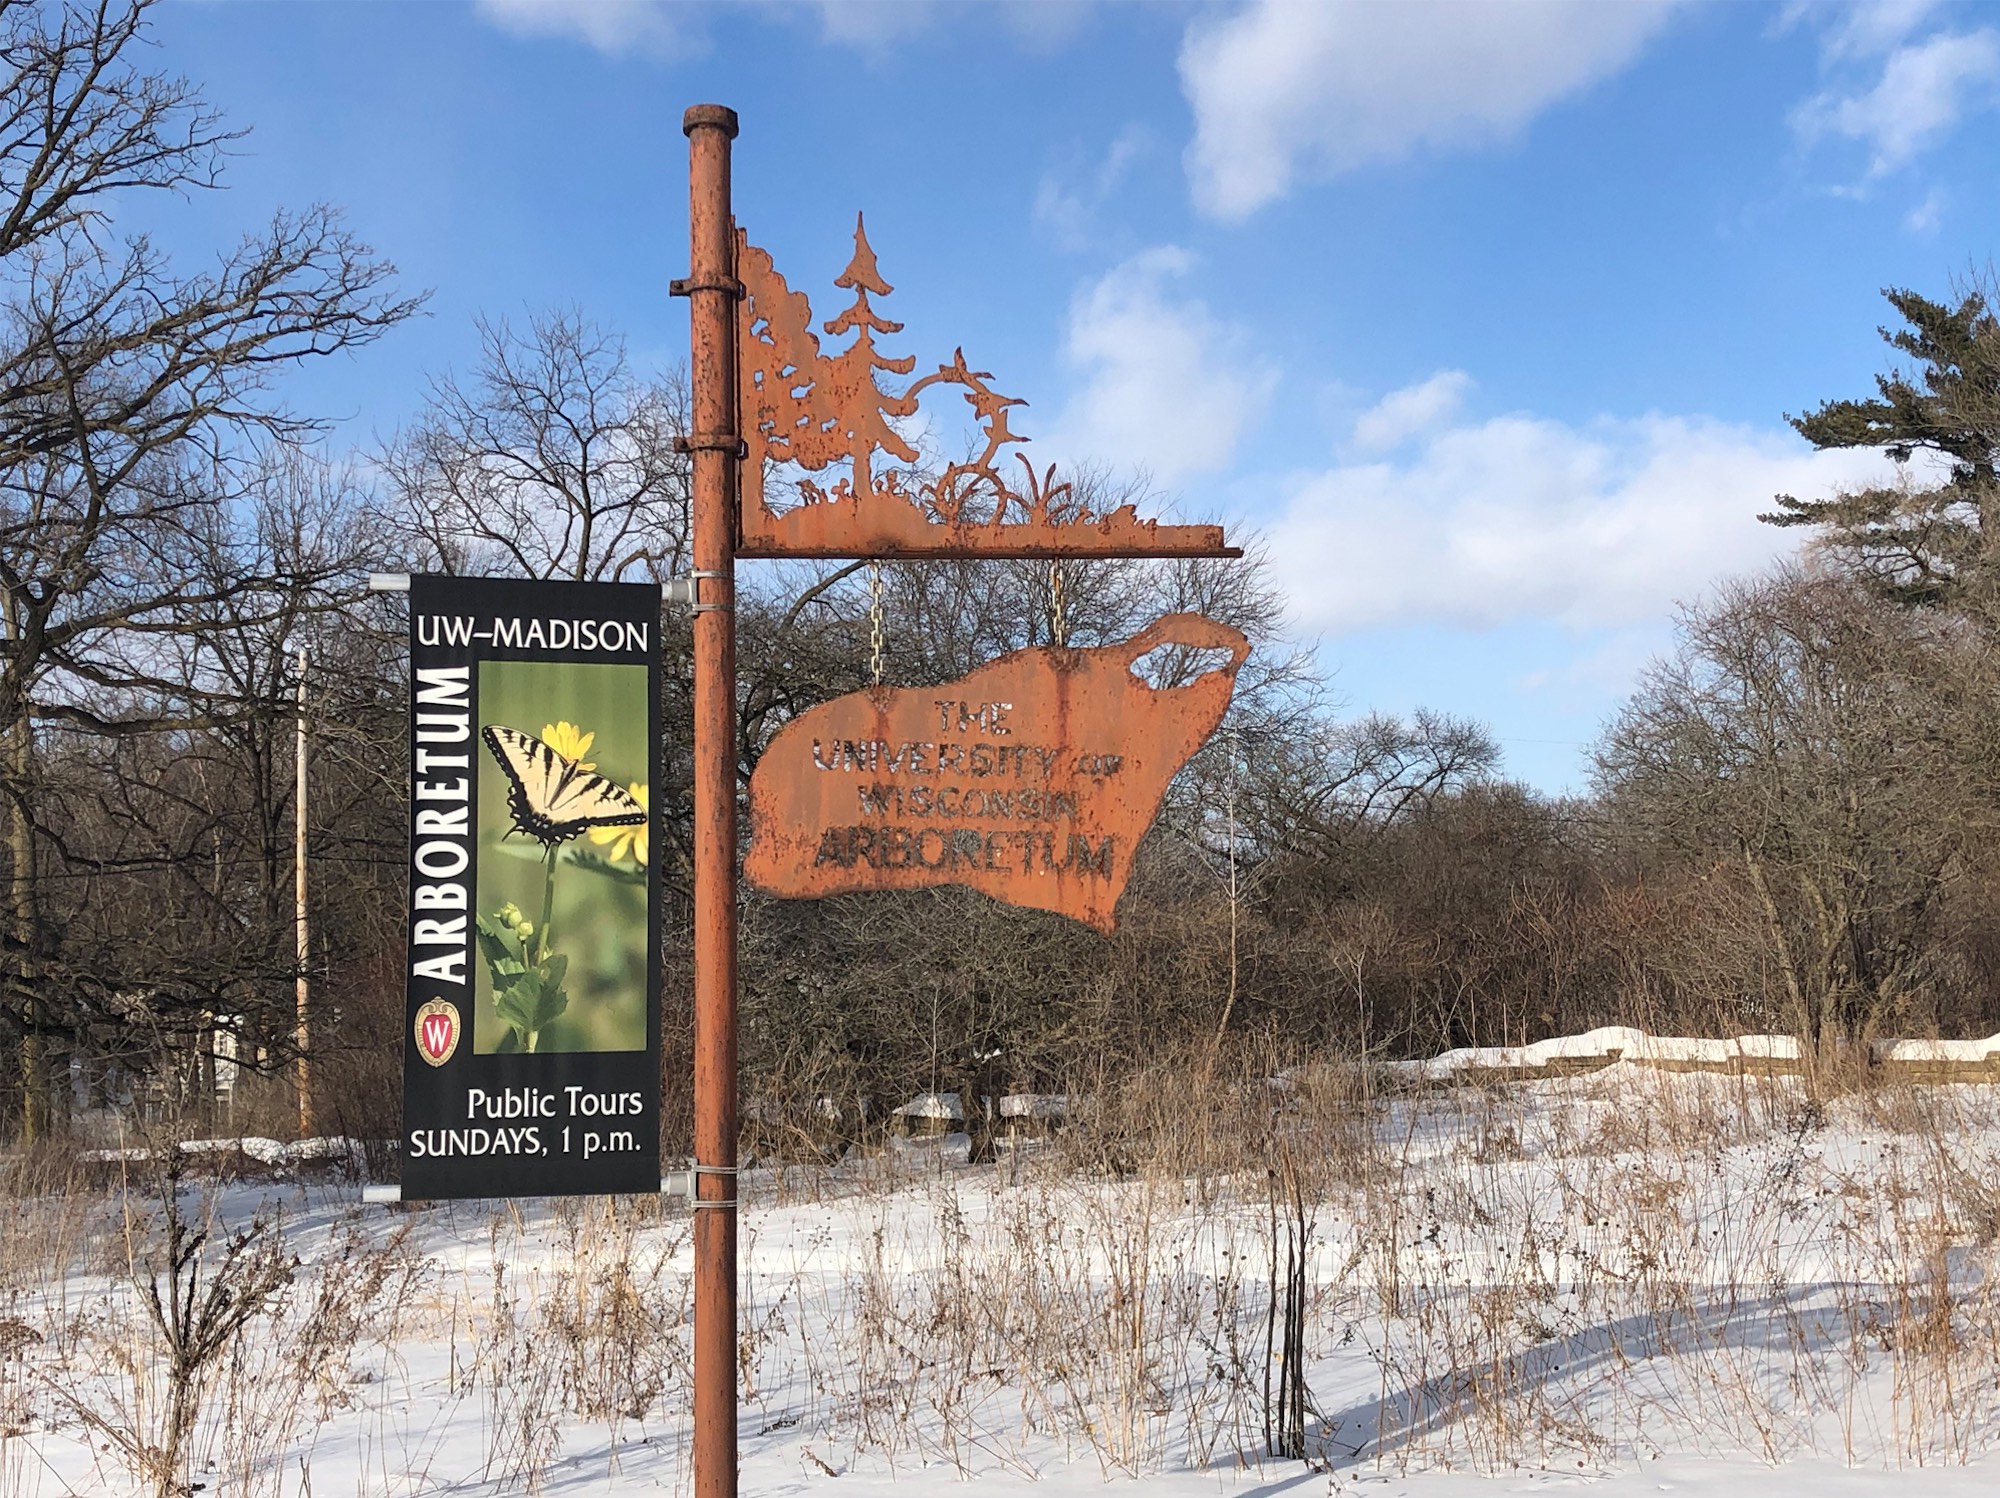 Entrance to the University of Wisconsin Arboretum from Seminole Drive.